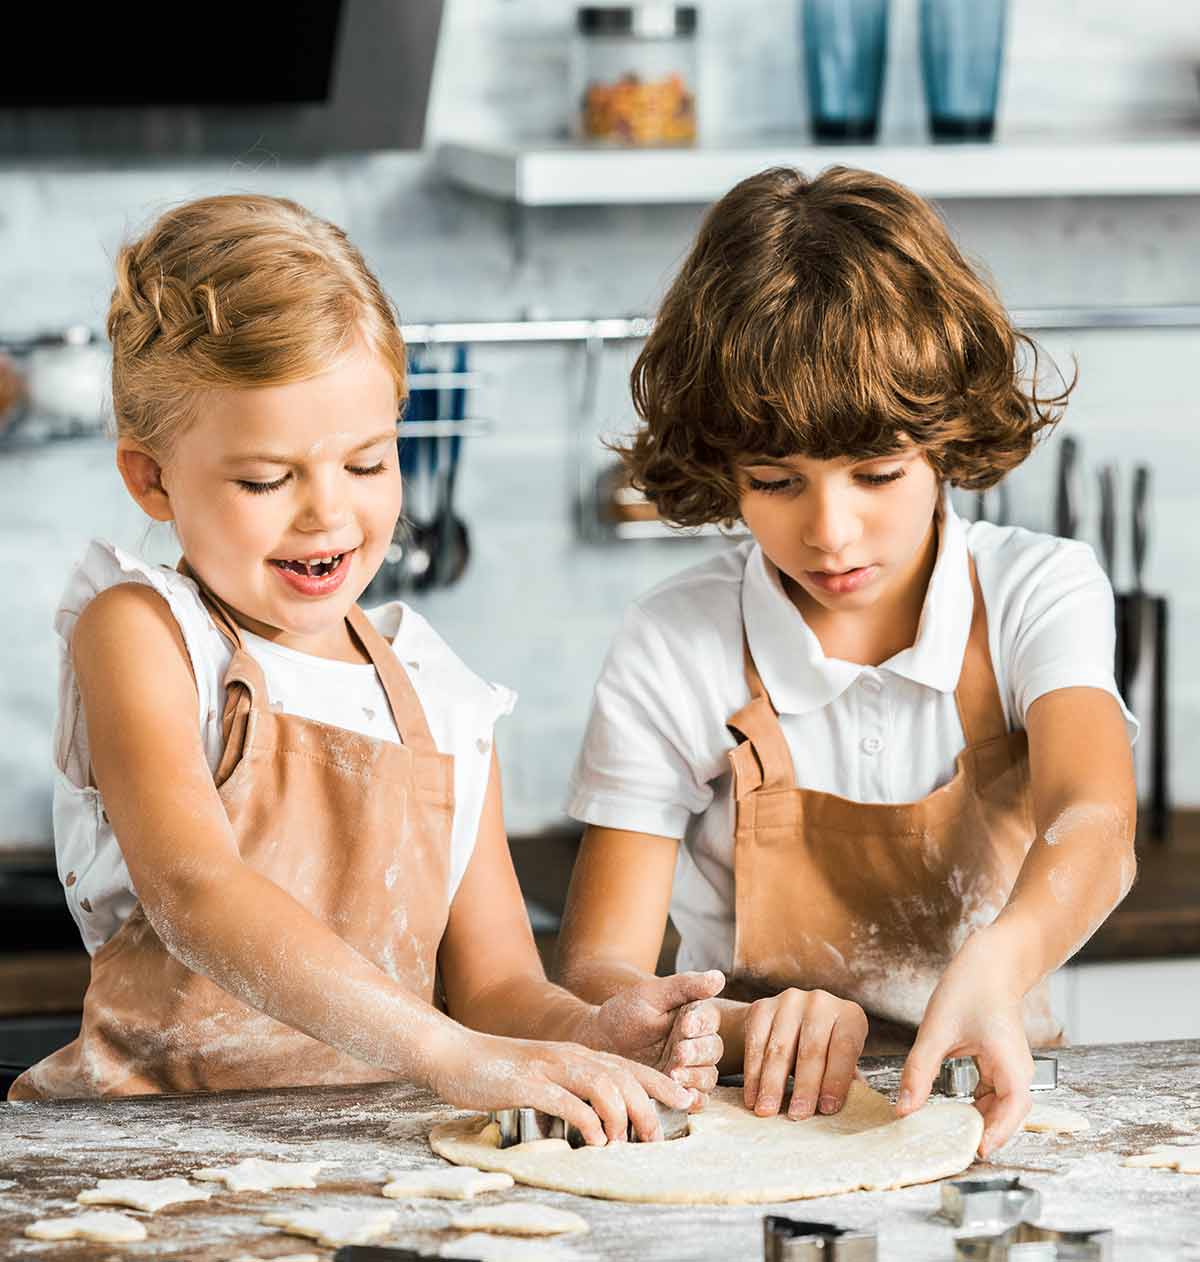 Two kids cooking and baking on a kitchen